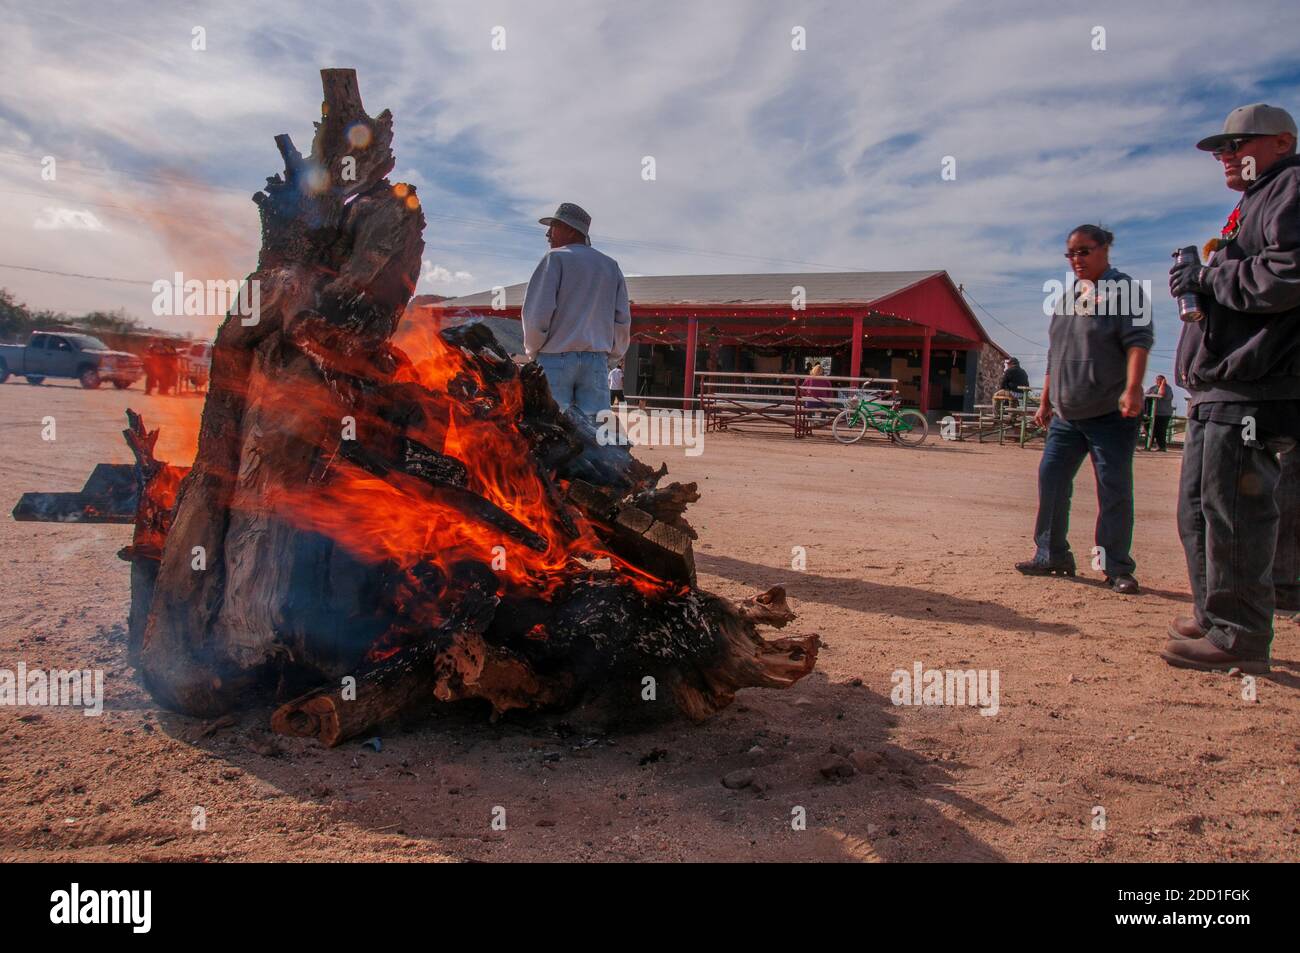 A fire is prepped for a Christmas celebration in the San Xavier District of the Tohono O'odham Reservation, Tucson, Arizona, USA. Stock Photo